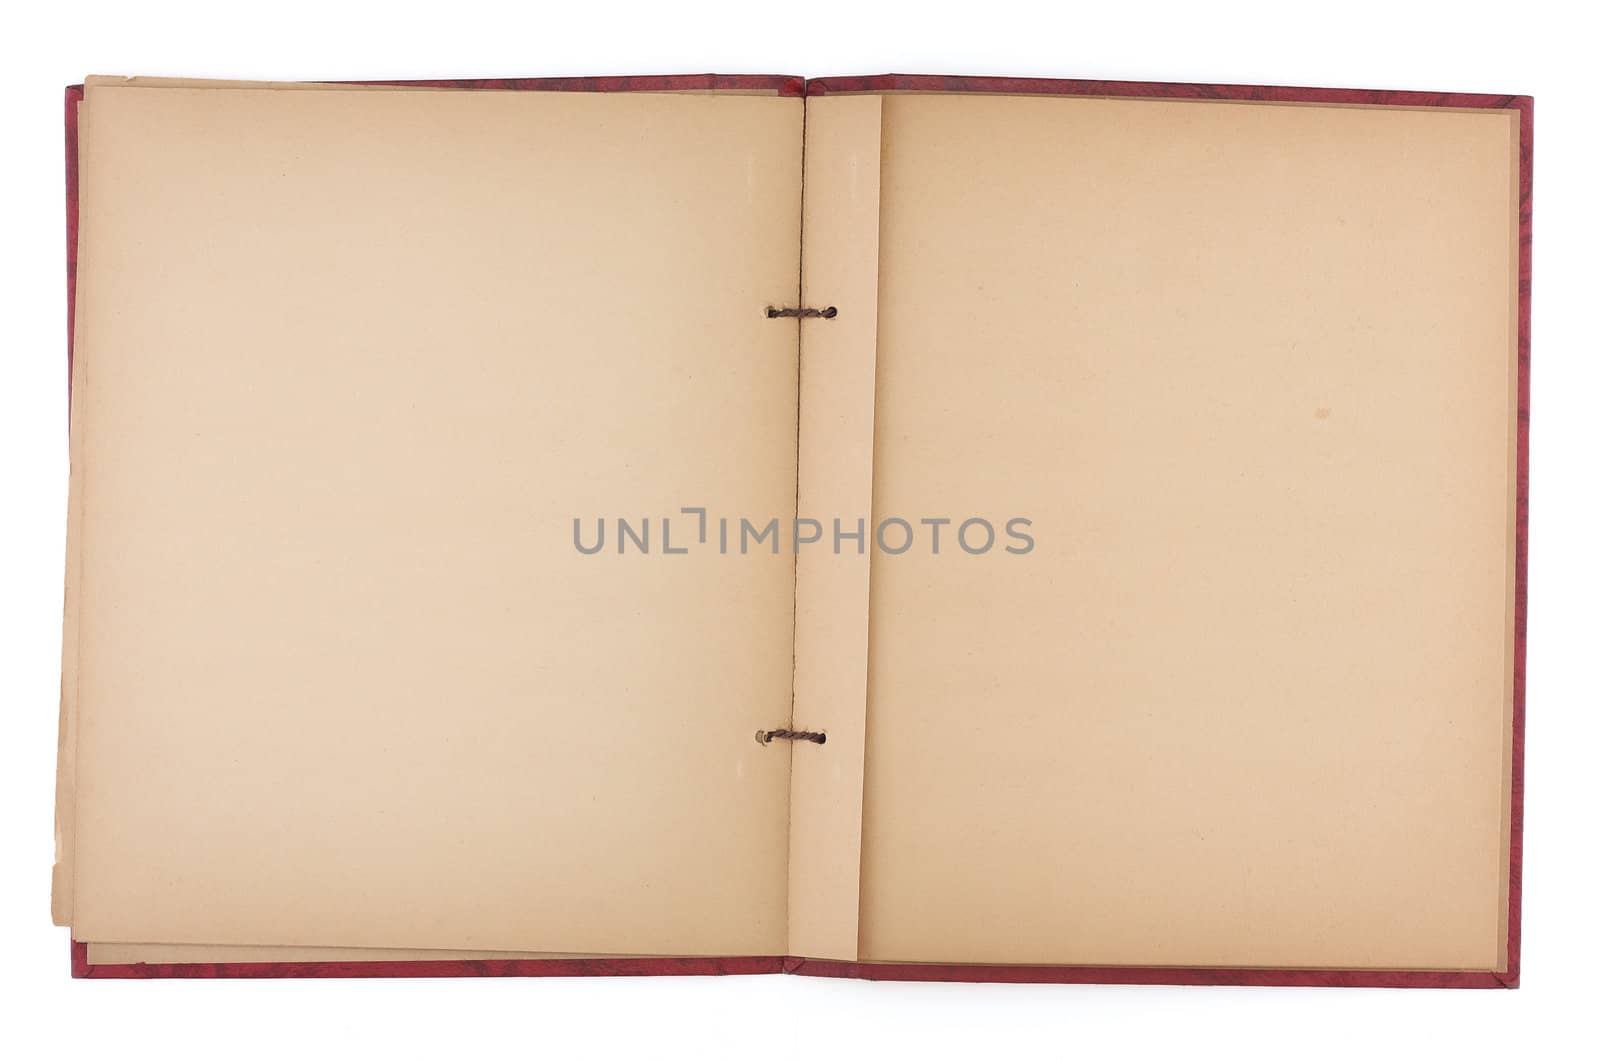 Blank Pages of an Old Scrap Book by Em3